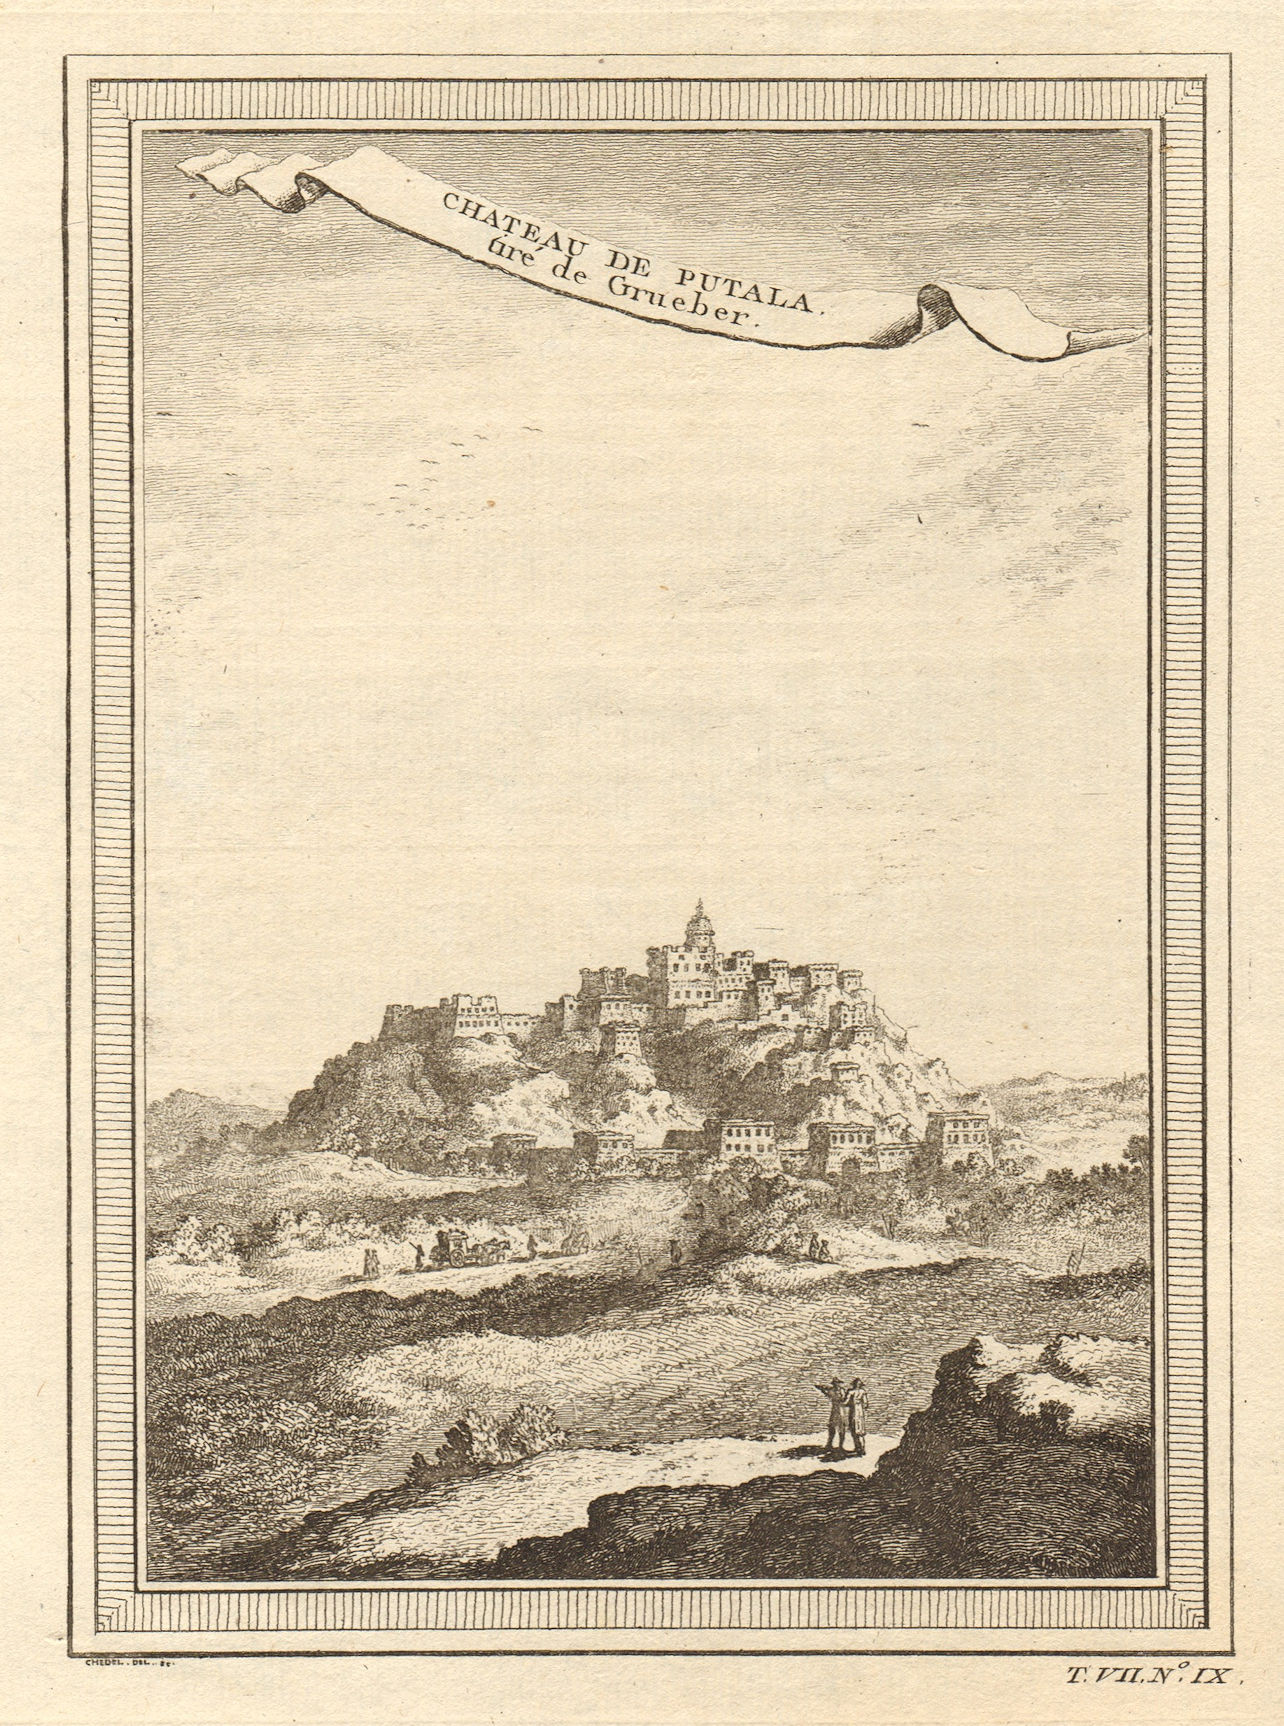 'Château de Putala'. View of the Potala Palace, Lhasa, Tibet, from Grueber 1749